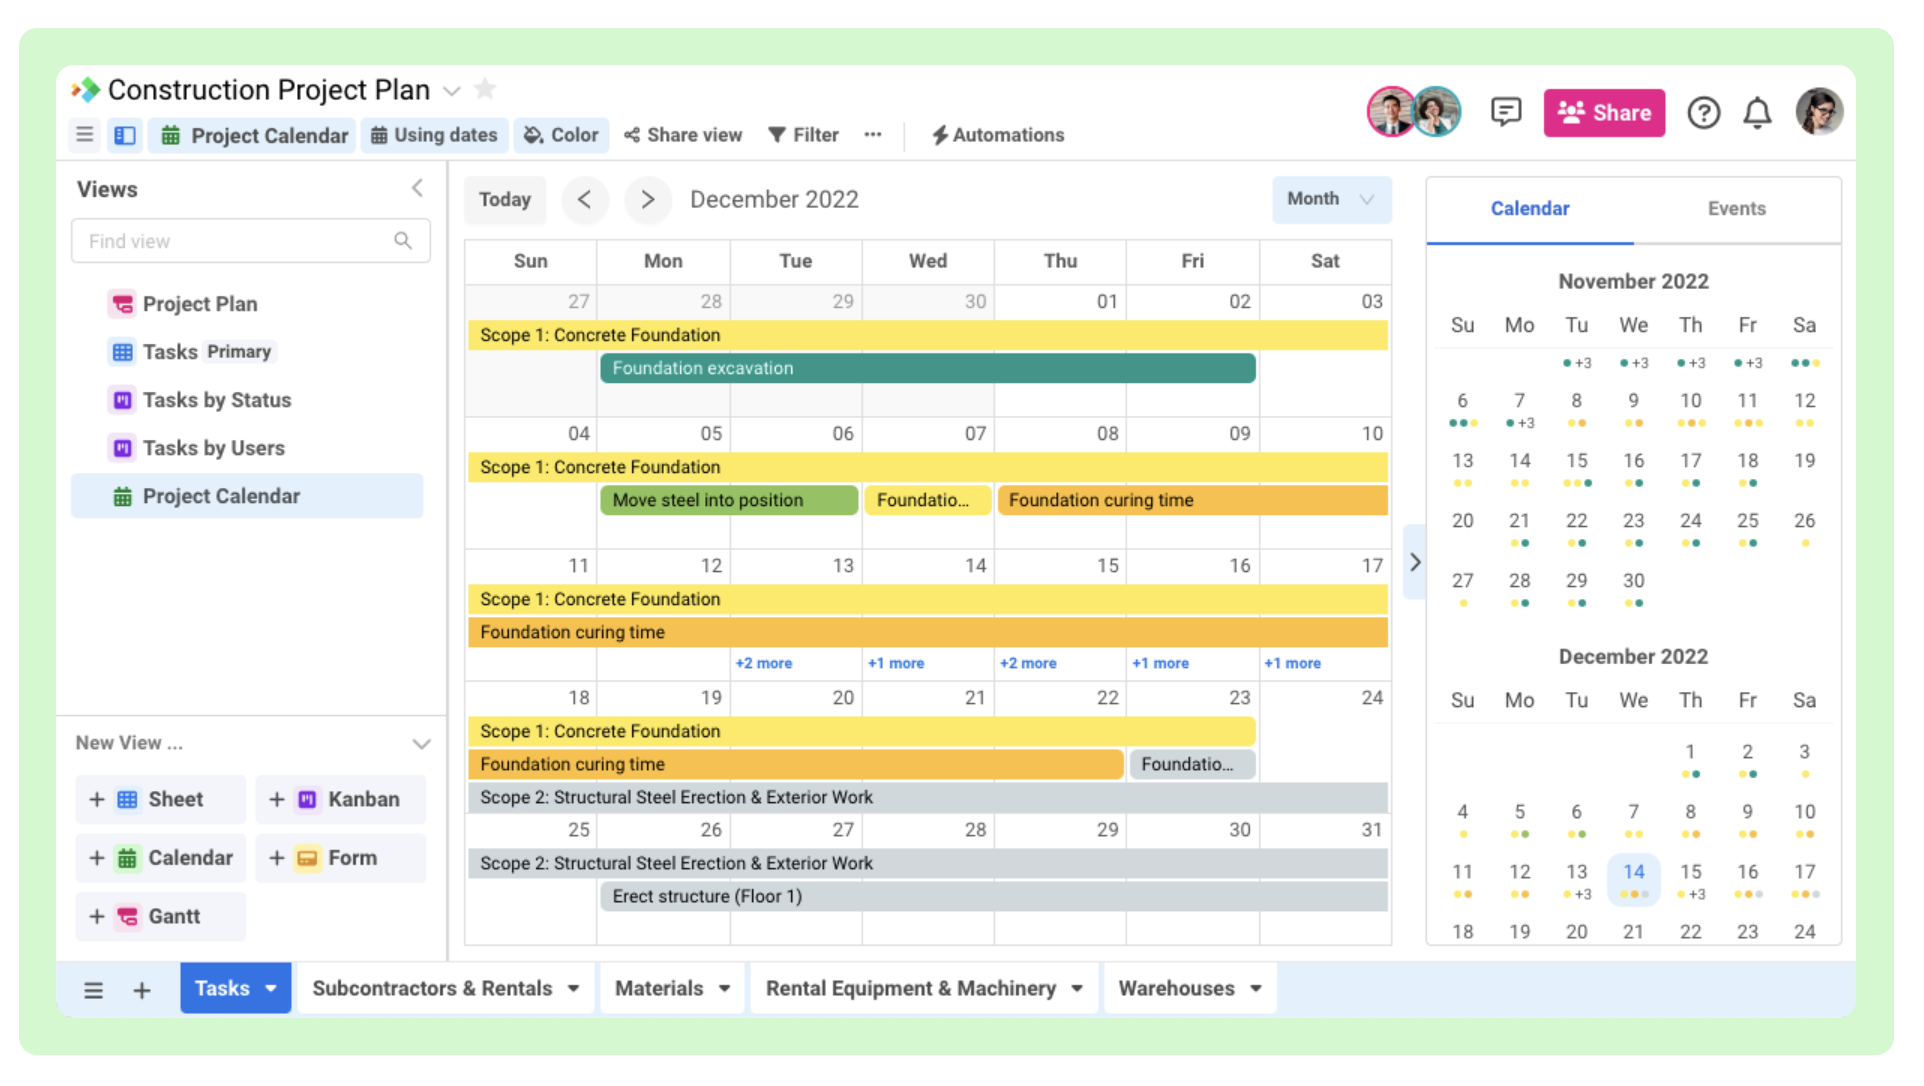 Calendar Views - Schedule your work with an interactive Calendar View Plan and organize work in a flexible calendar view to keep everyone up to date and on the same page with schedules.